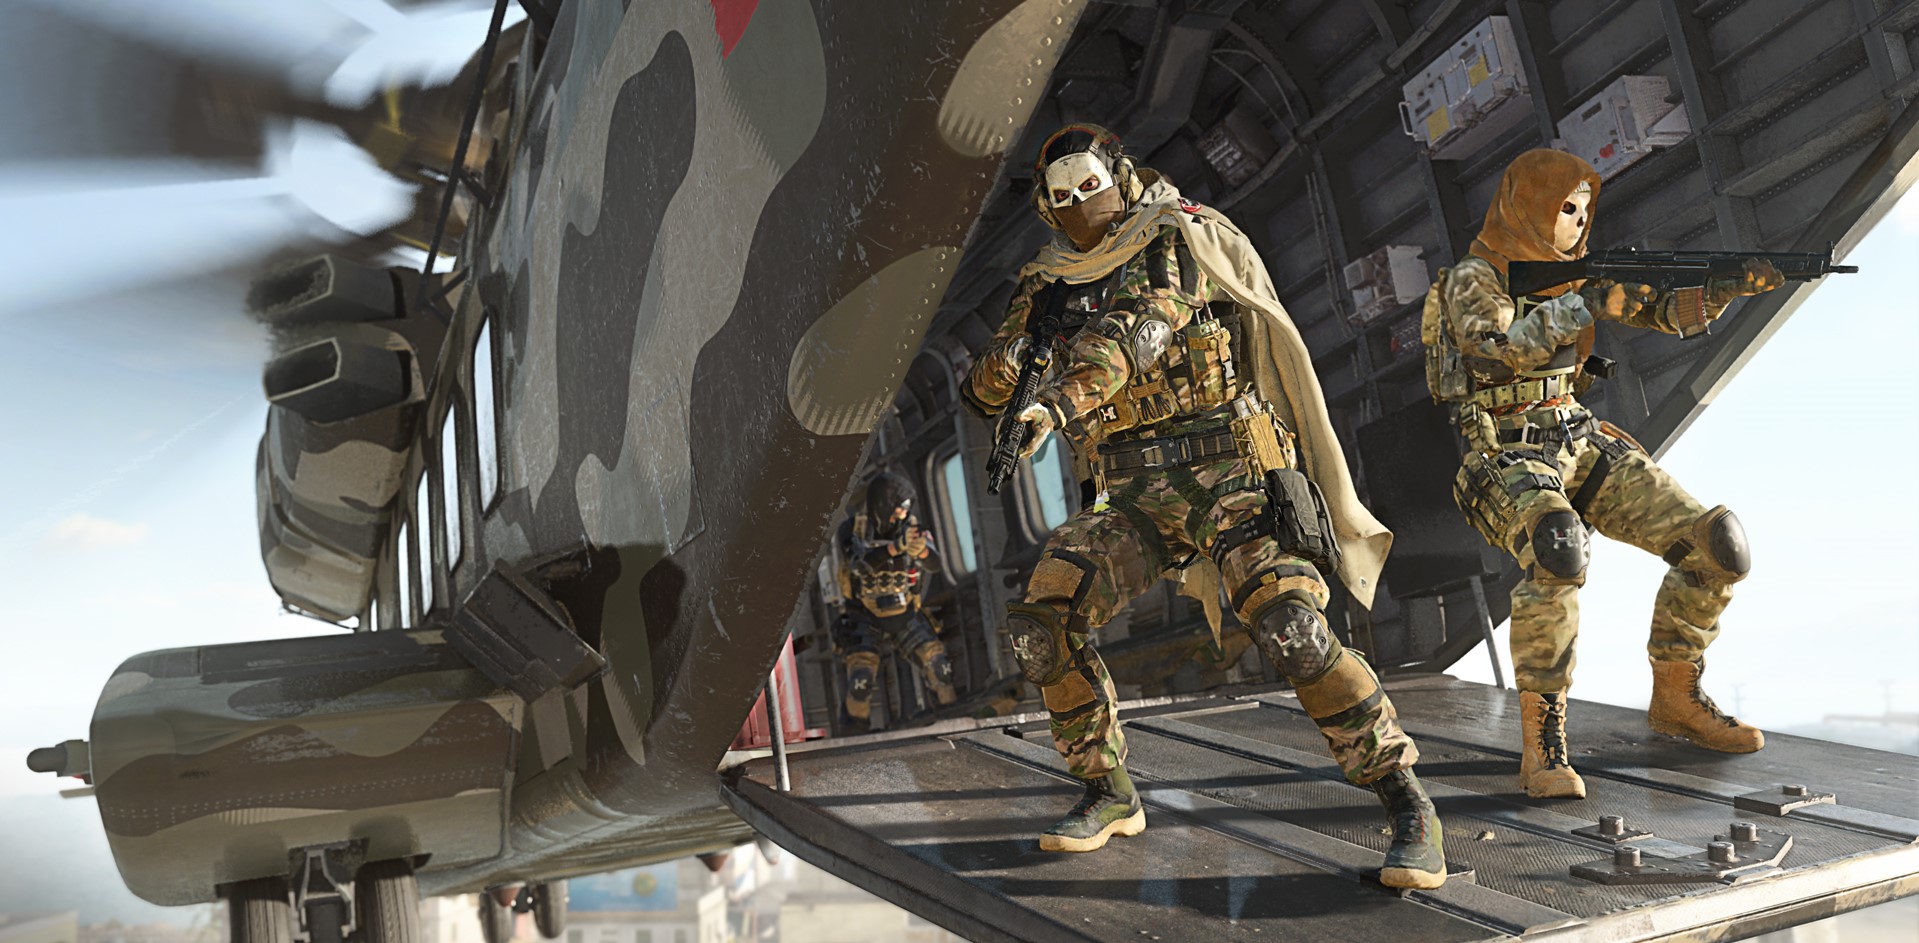 Call of Duty: Warzone inventory won't carry over into Warzone 2.0